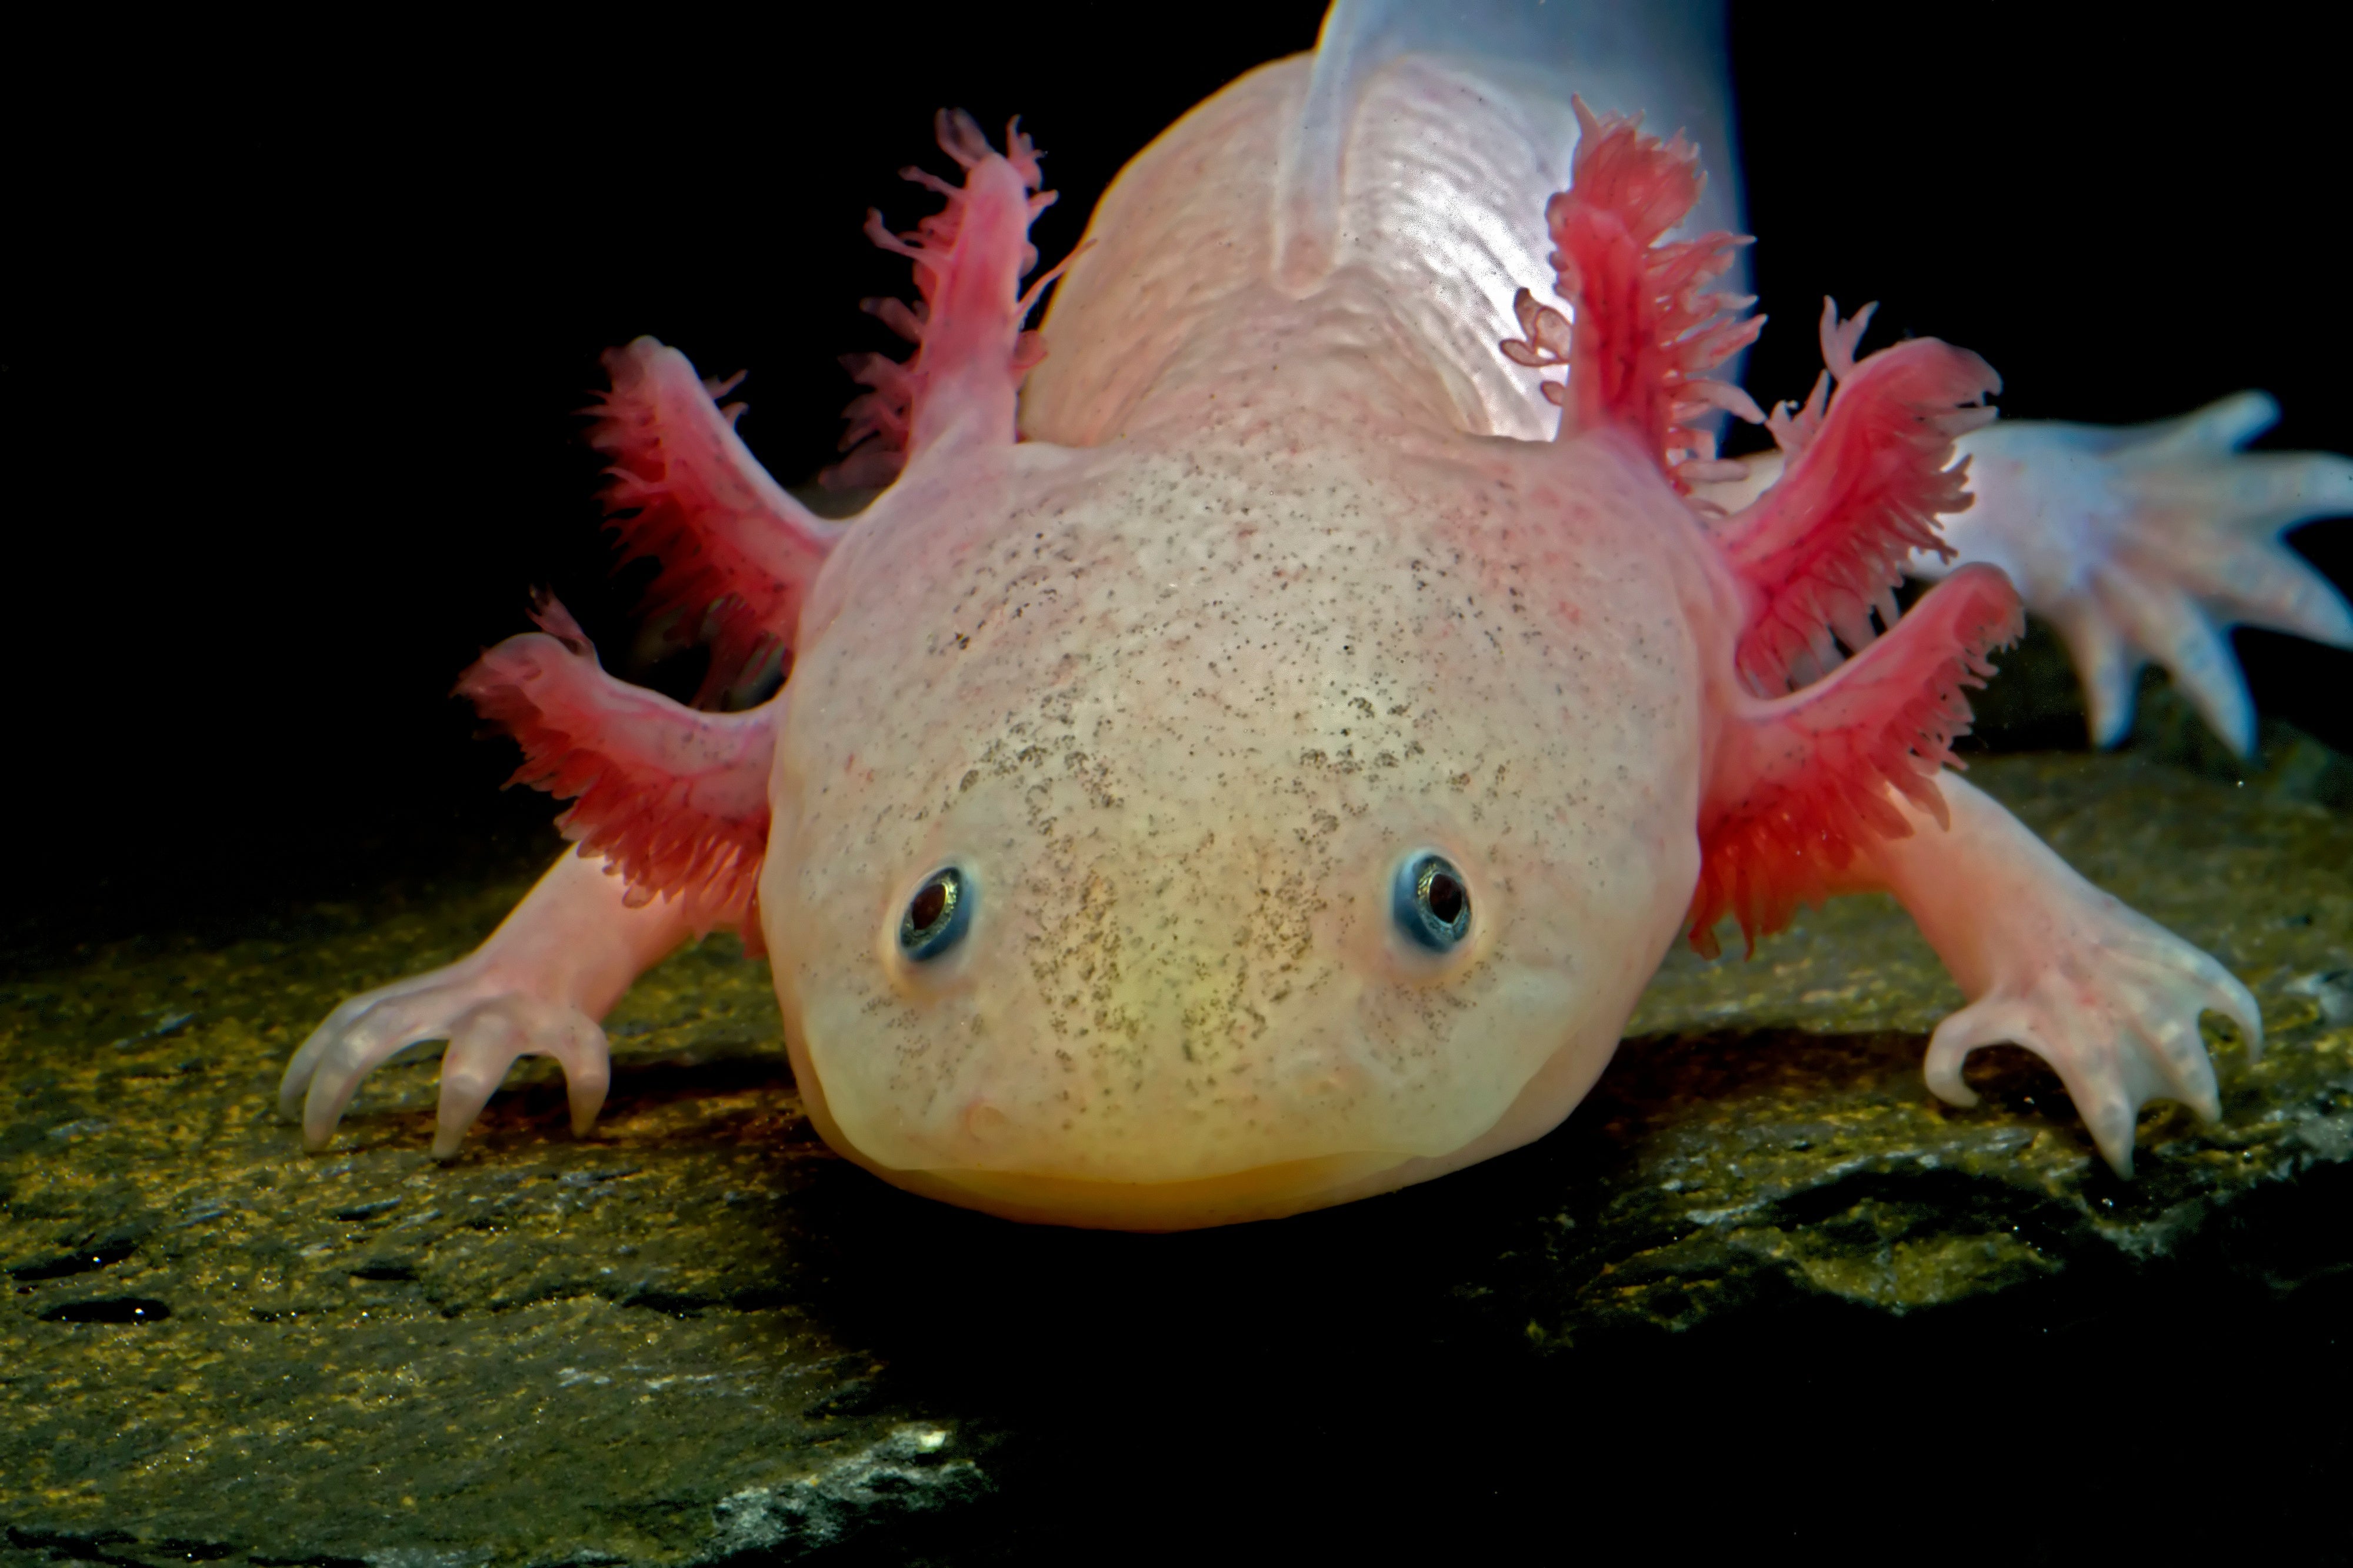 How to Take Care of an Axolotl Properly